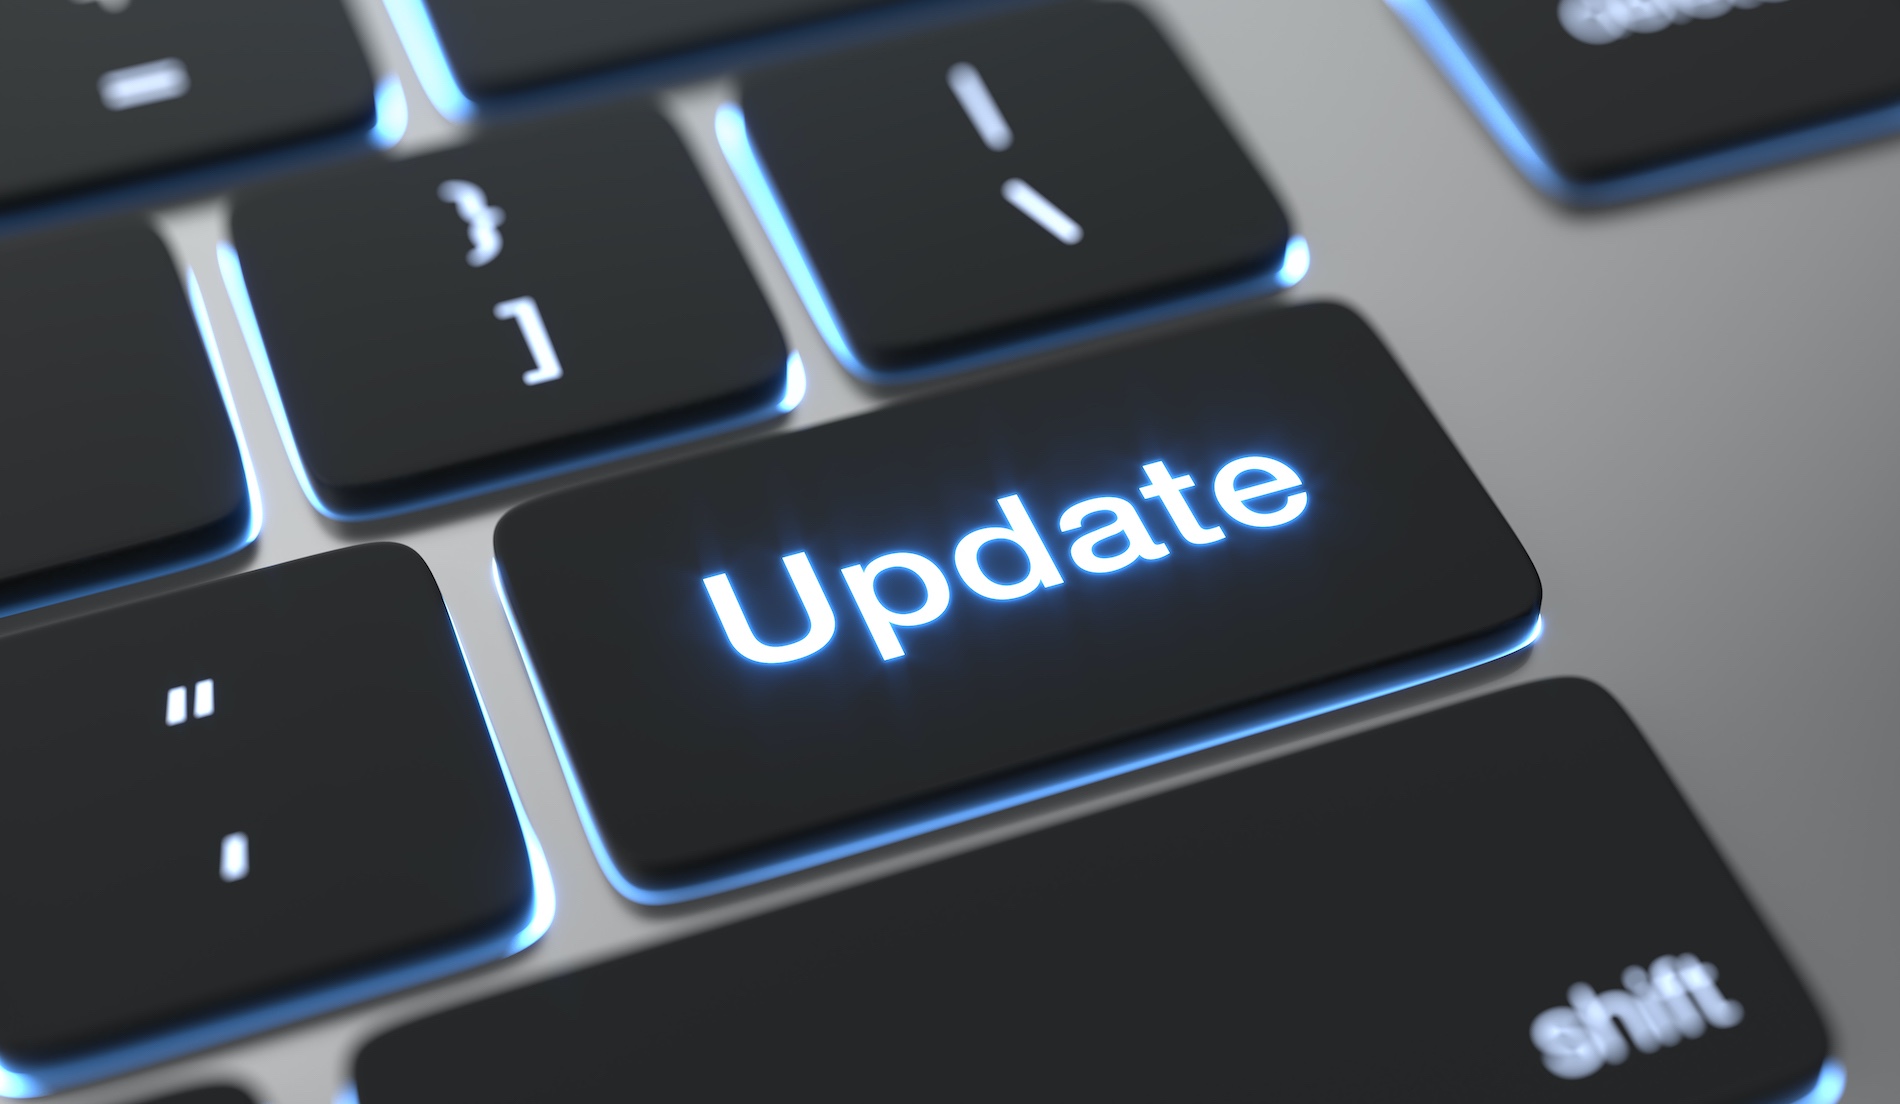 Update button on keyboard represents article title for update wordpress website